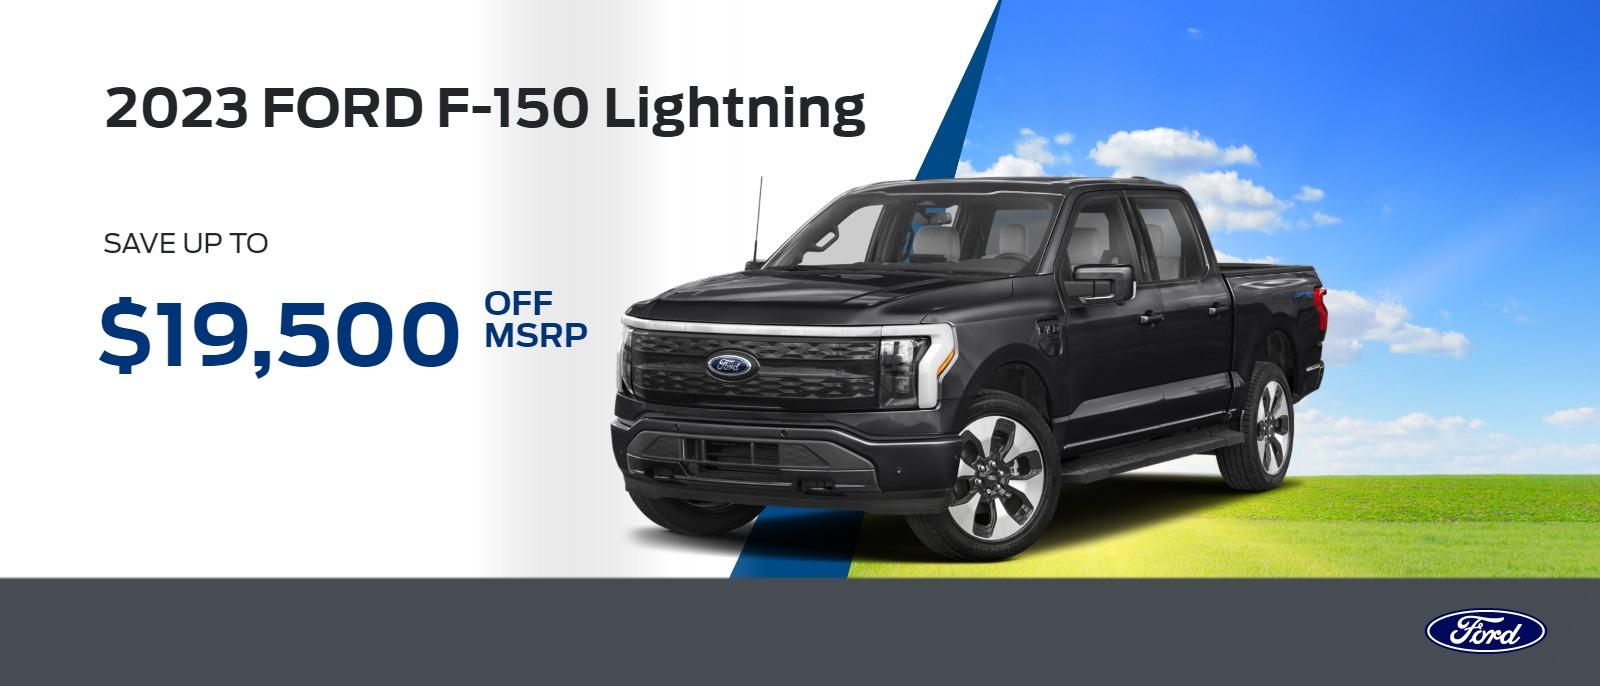 2023 ORD F-150 Lightning Save up to $19,500 OFF MSRP